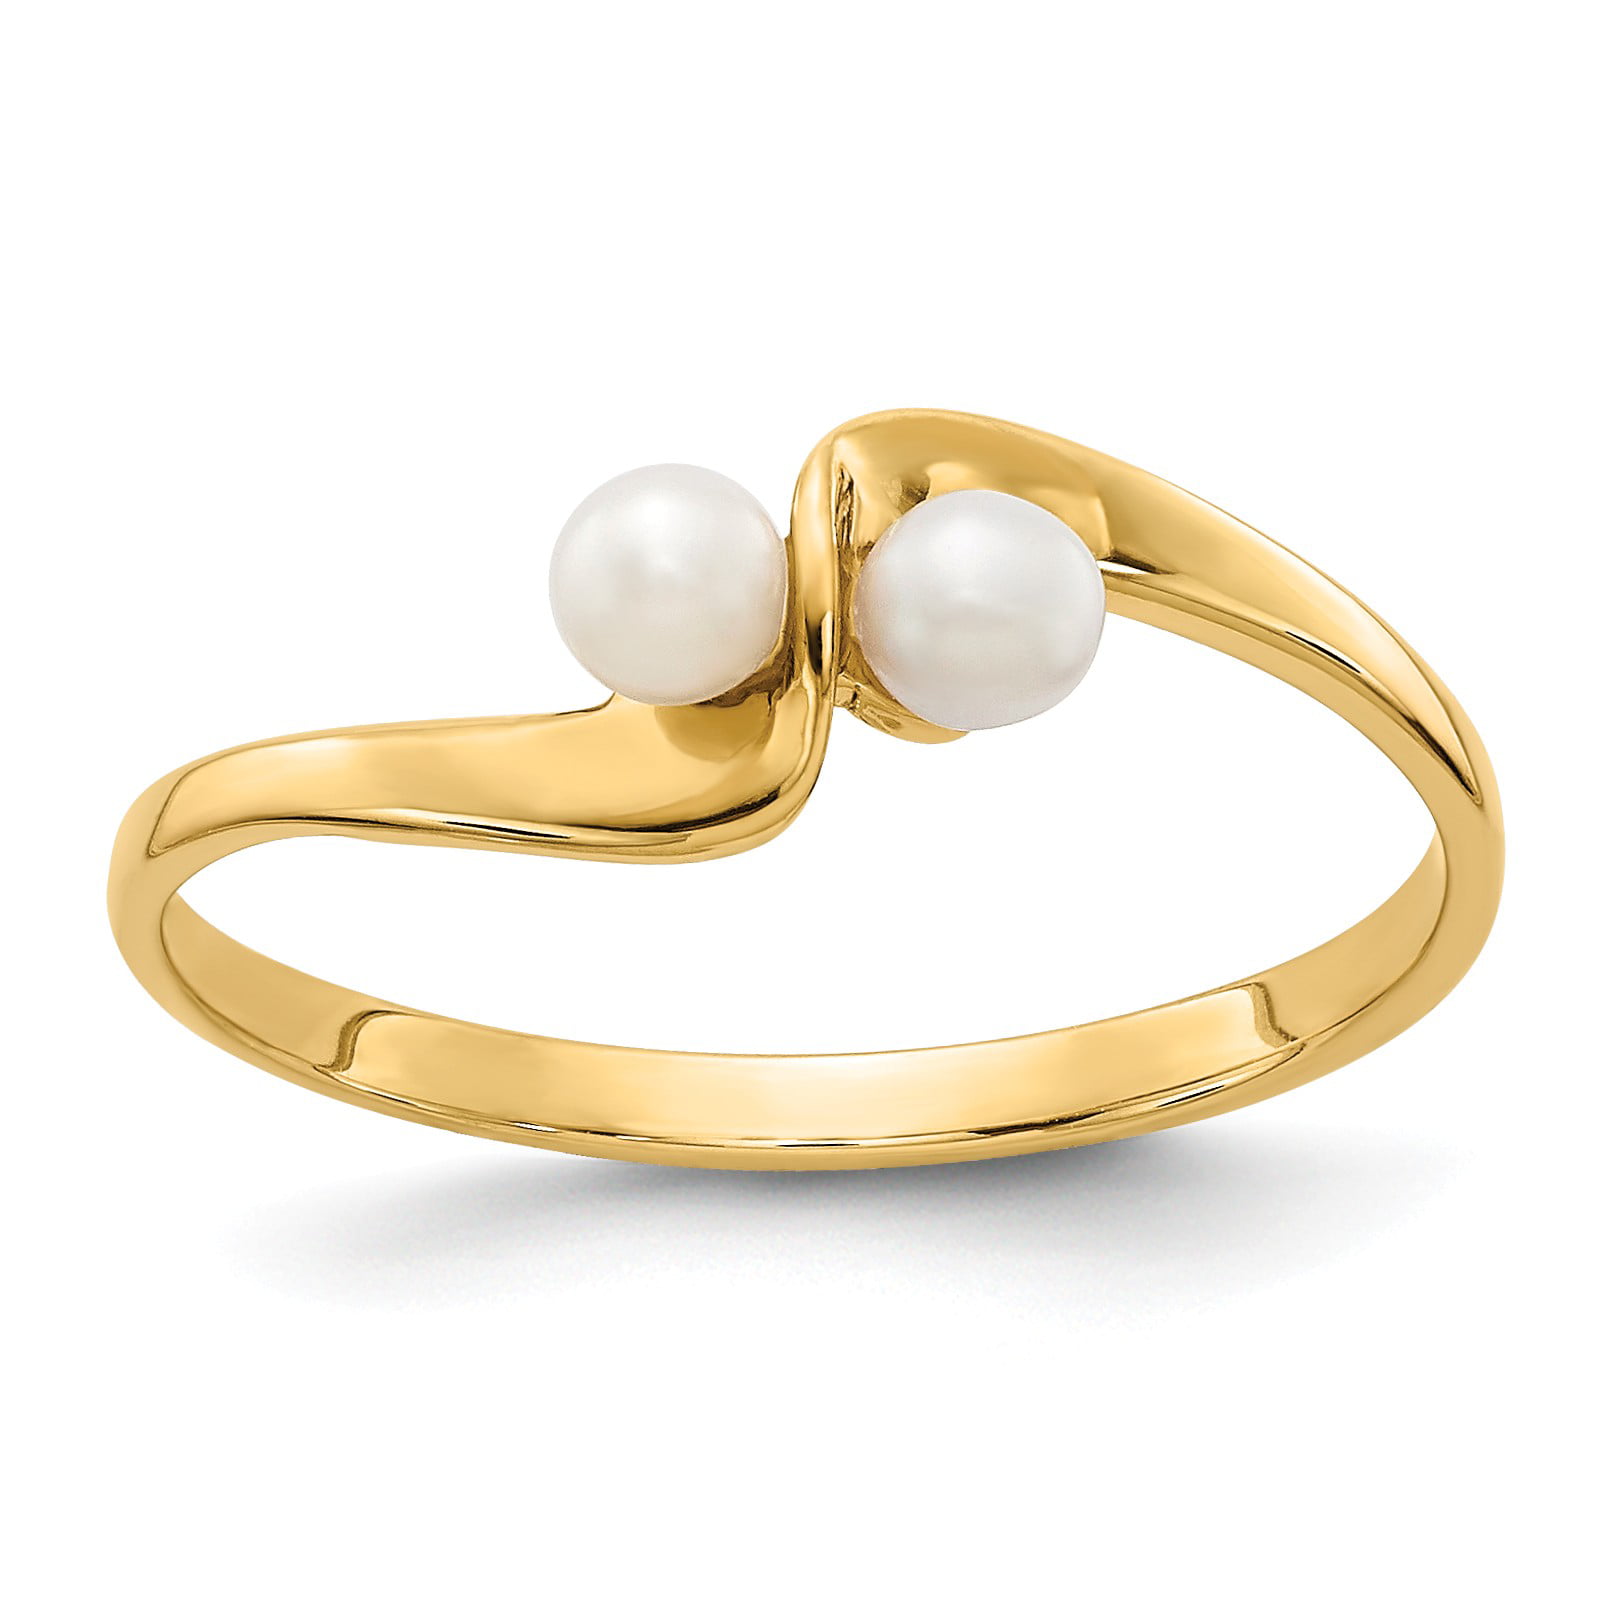 14k Polished Pearl Ring Mounting in 14k Yellow Gold - Size 6 - Walmart.com